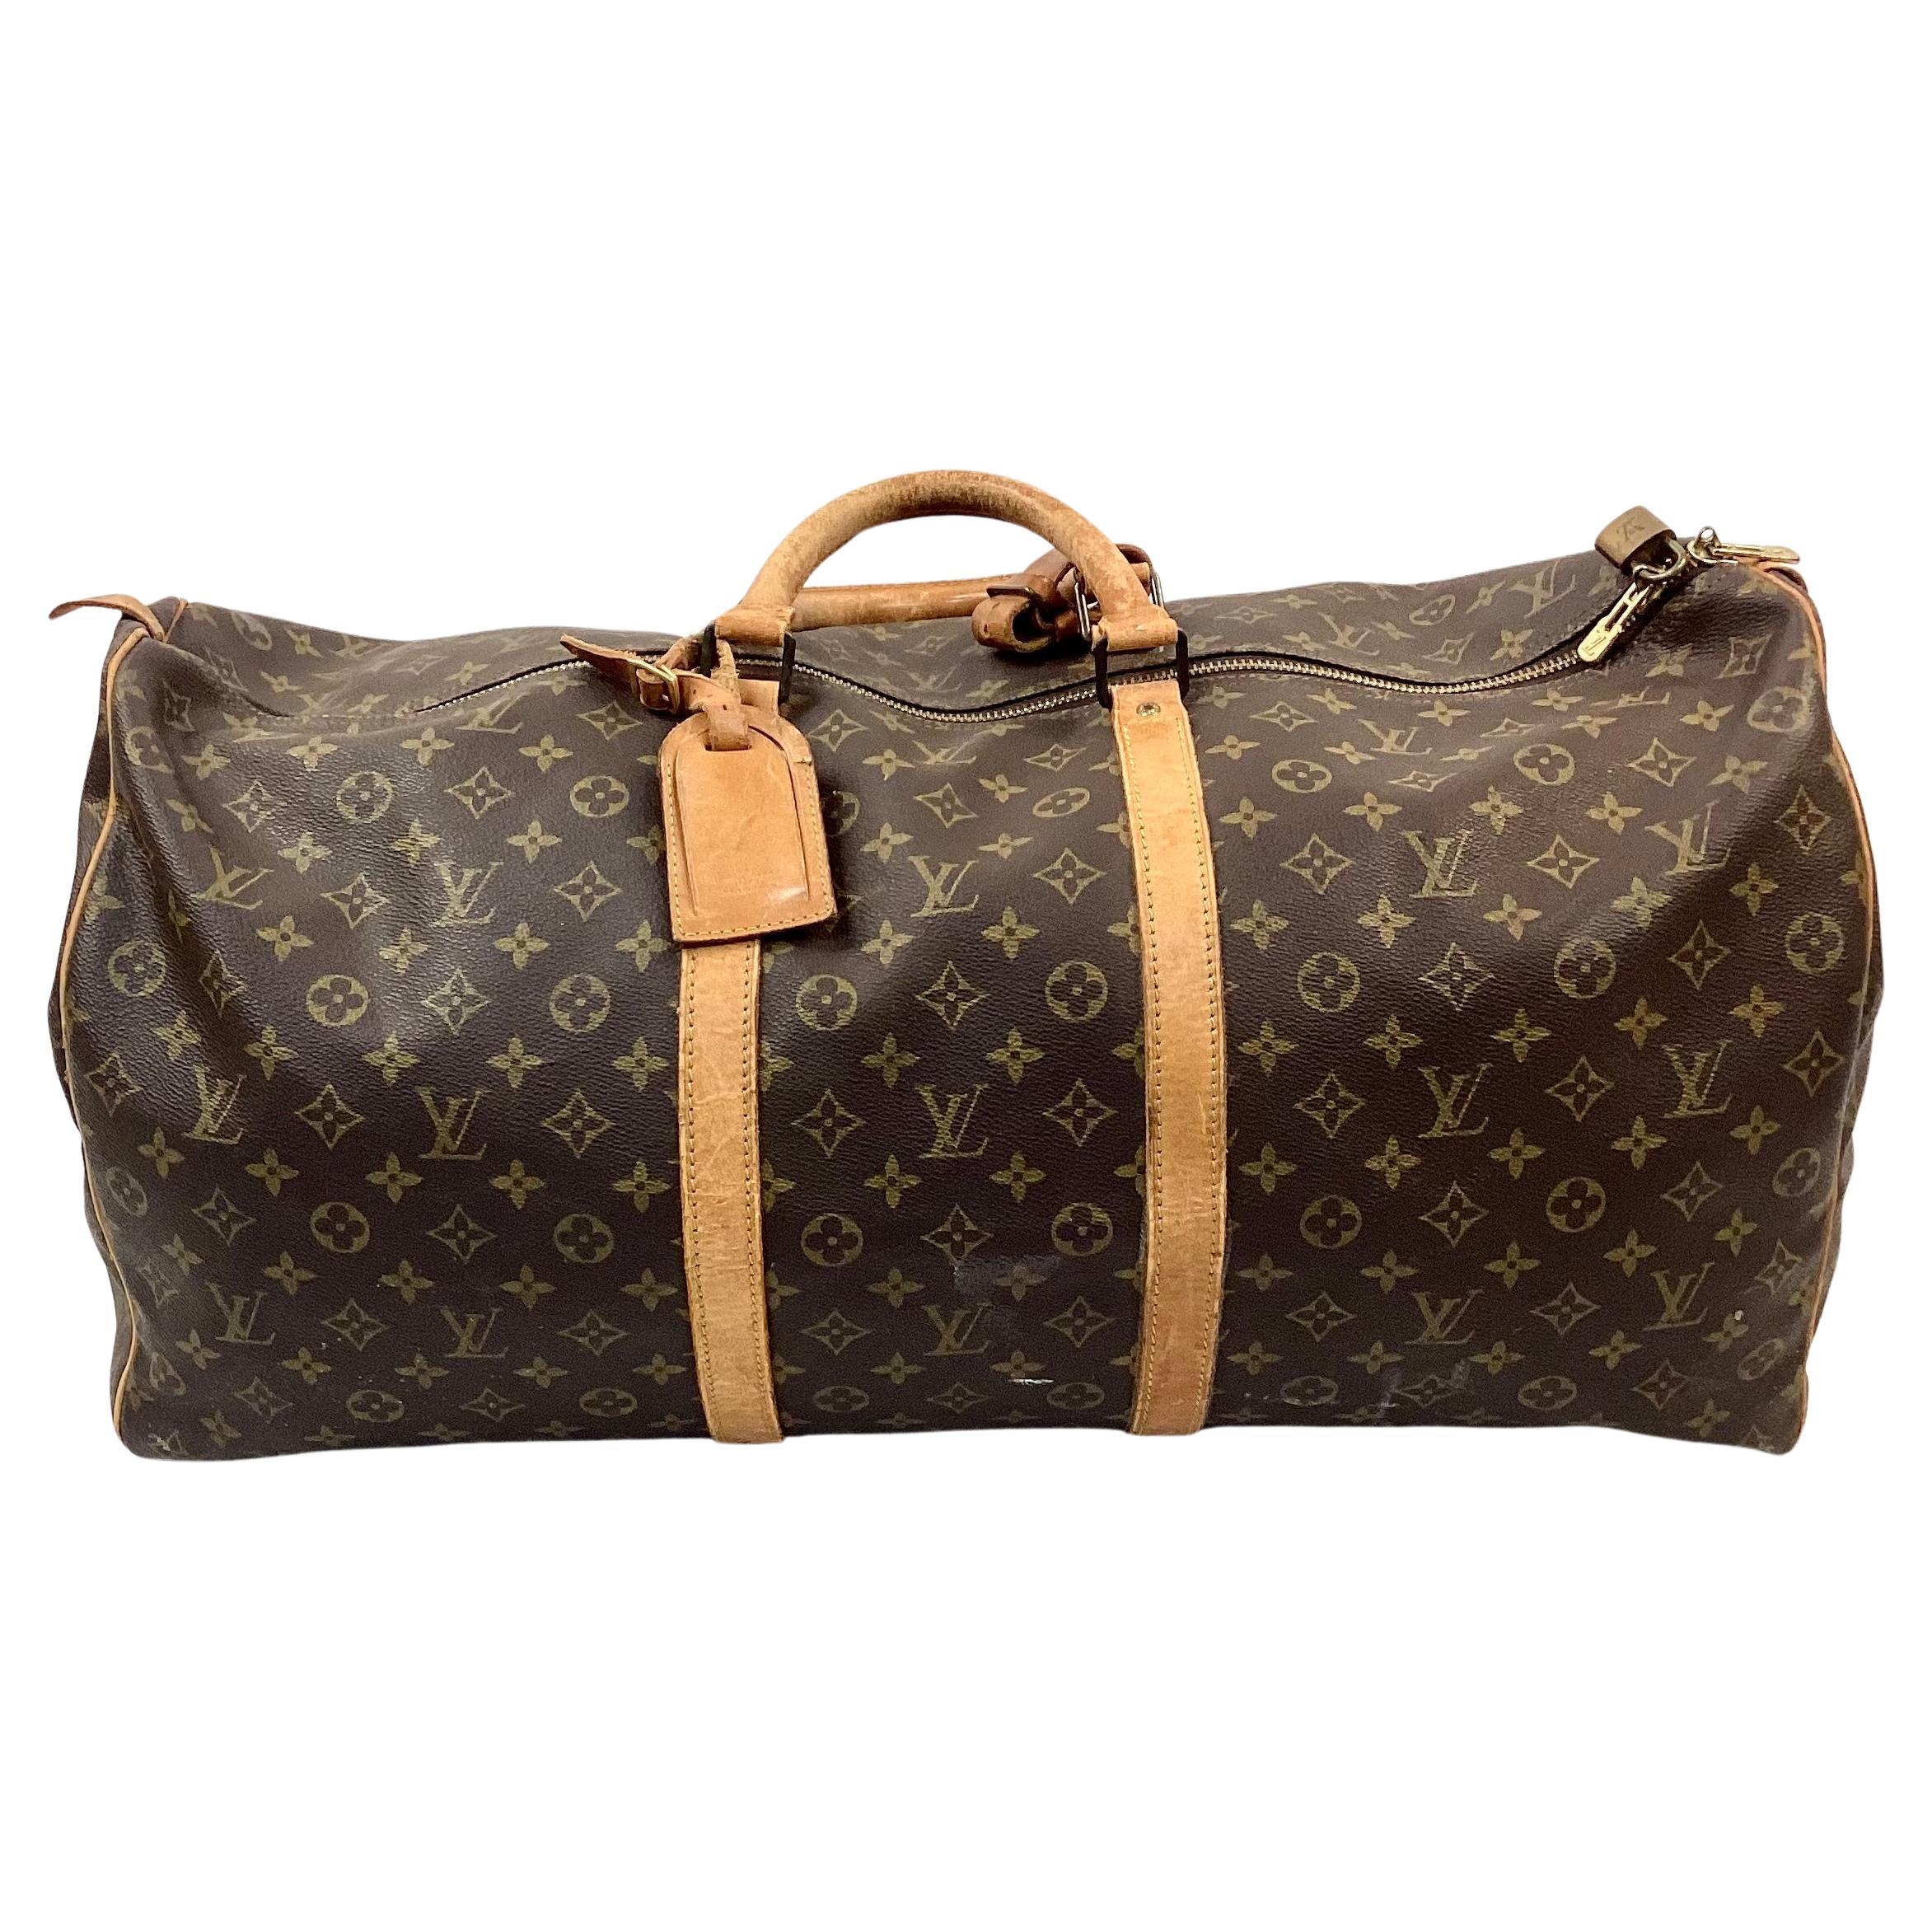 🌟 LOUIS VUITTON BAG 🌟 With Box and - B & W Online Store